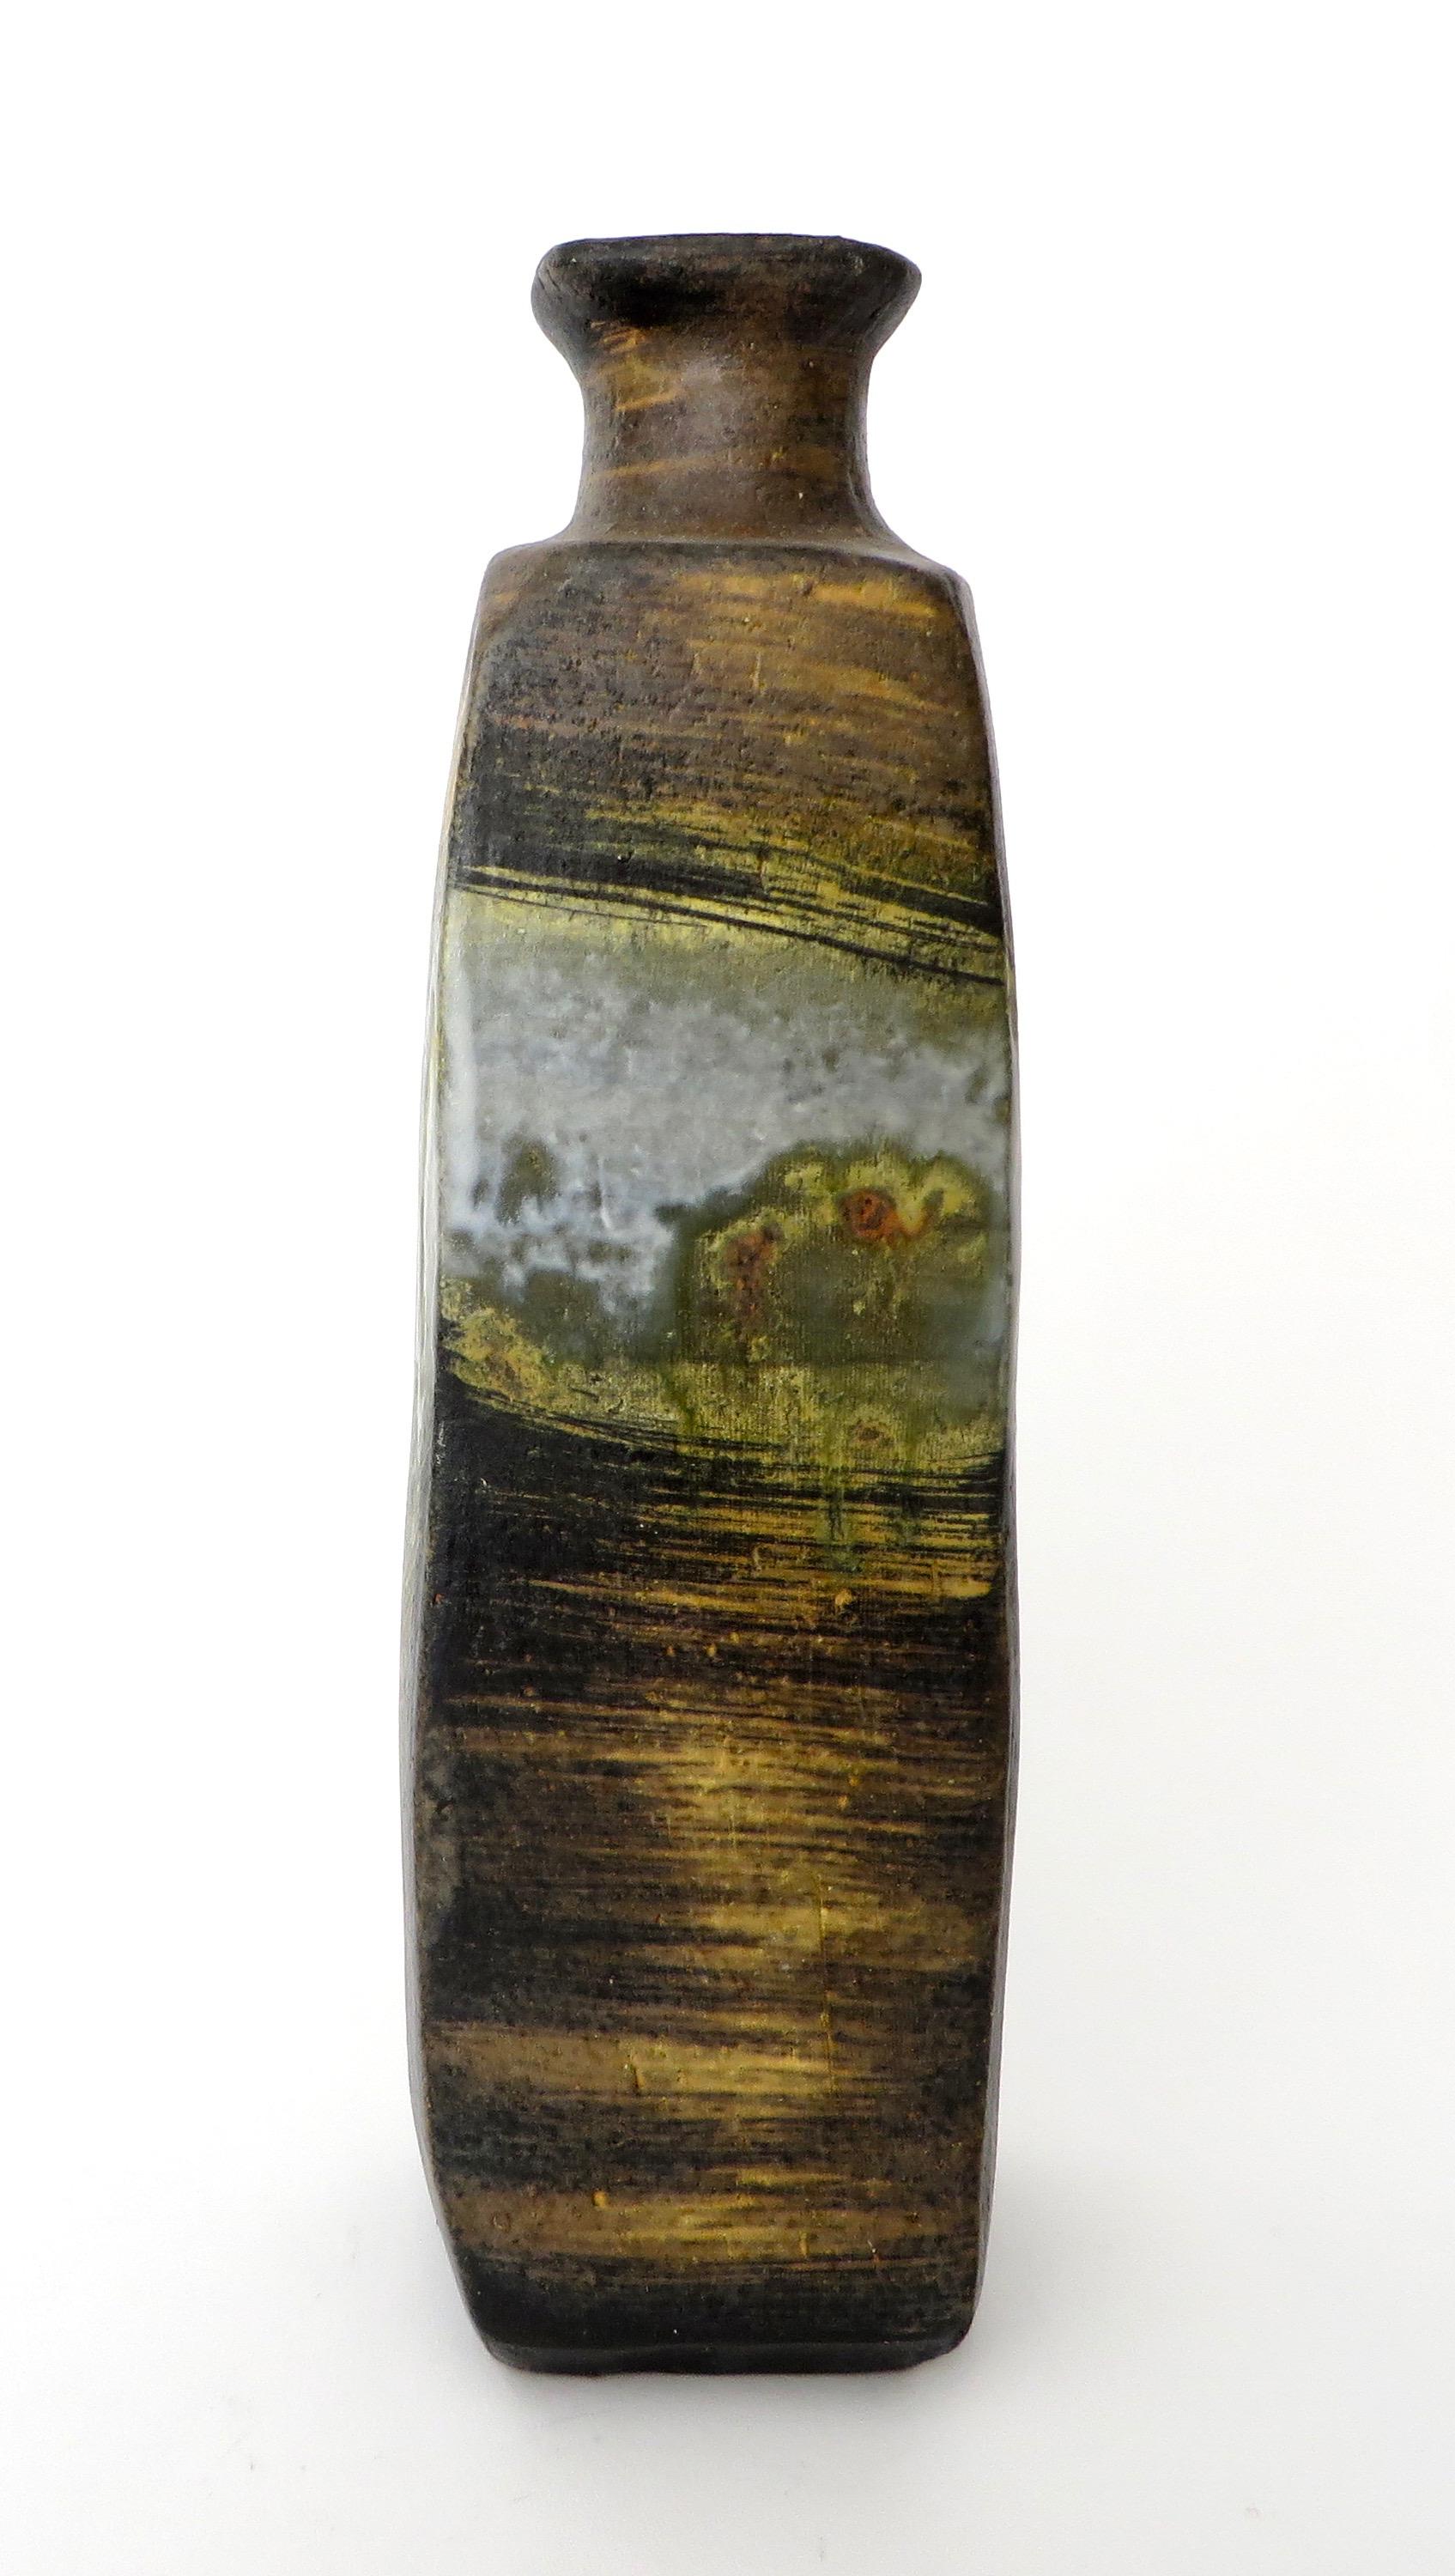 Beautiful and unusual painterly glazed ceramic vase by Marcello Fantoni.
Very expressive use of the glaze in evidence of the artists burst of the hand with the brush.
This piece is signed and marked to the underside of the base, Fantoni Italy for